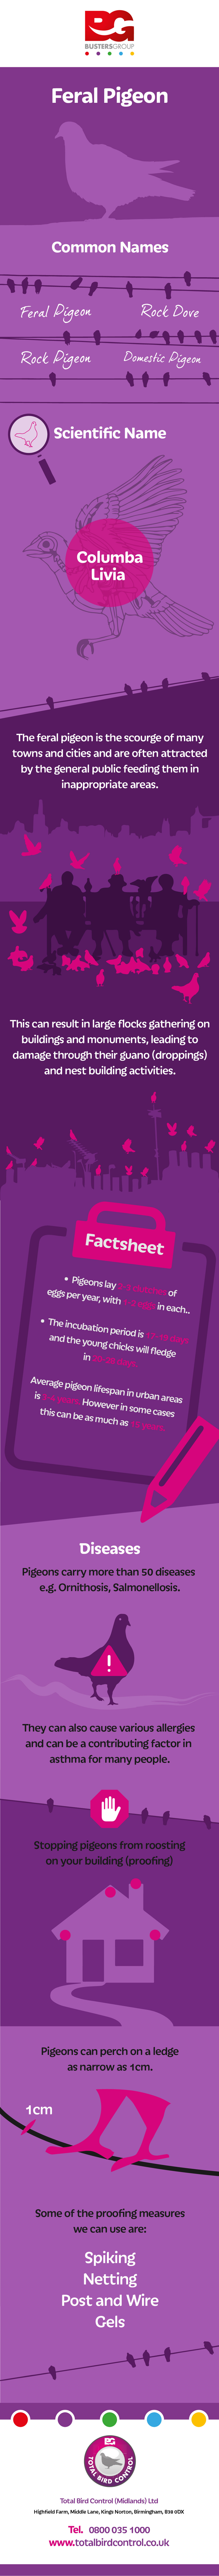 Facts_Sheet_about_Feral_Pigeon